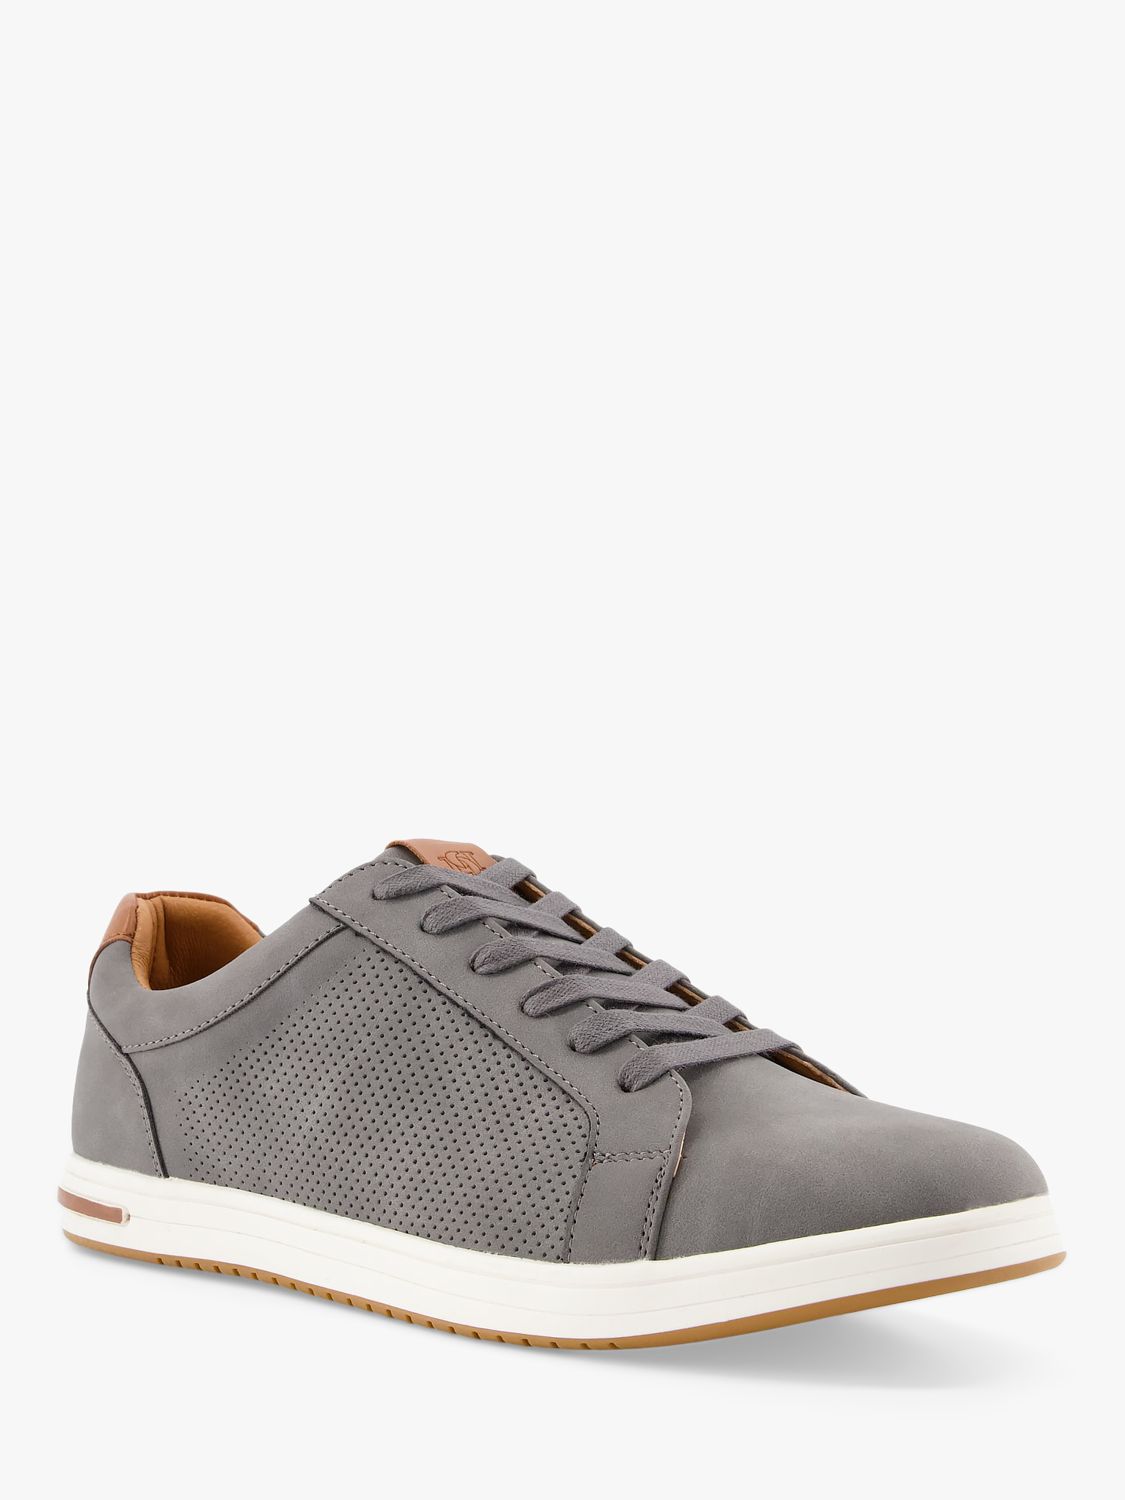 Dune Tezzy Suedette Lace Up Trainers, Grey-synthetic at John Lewis ...